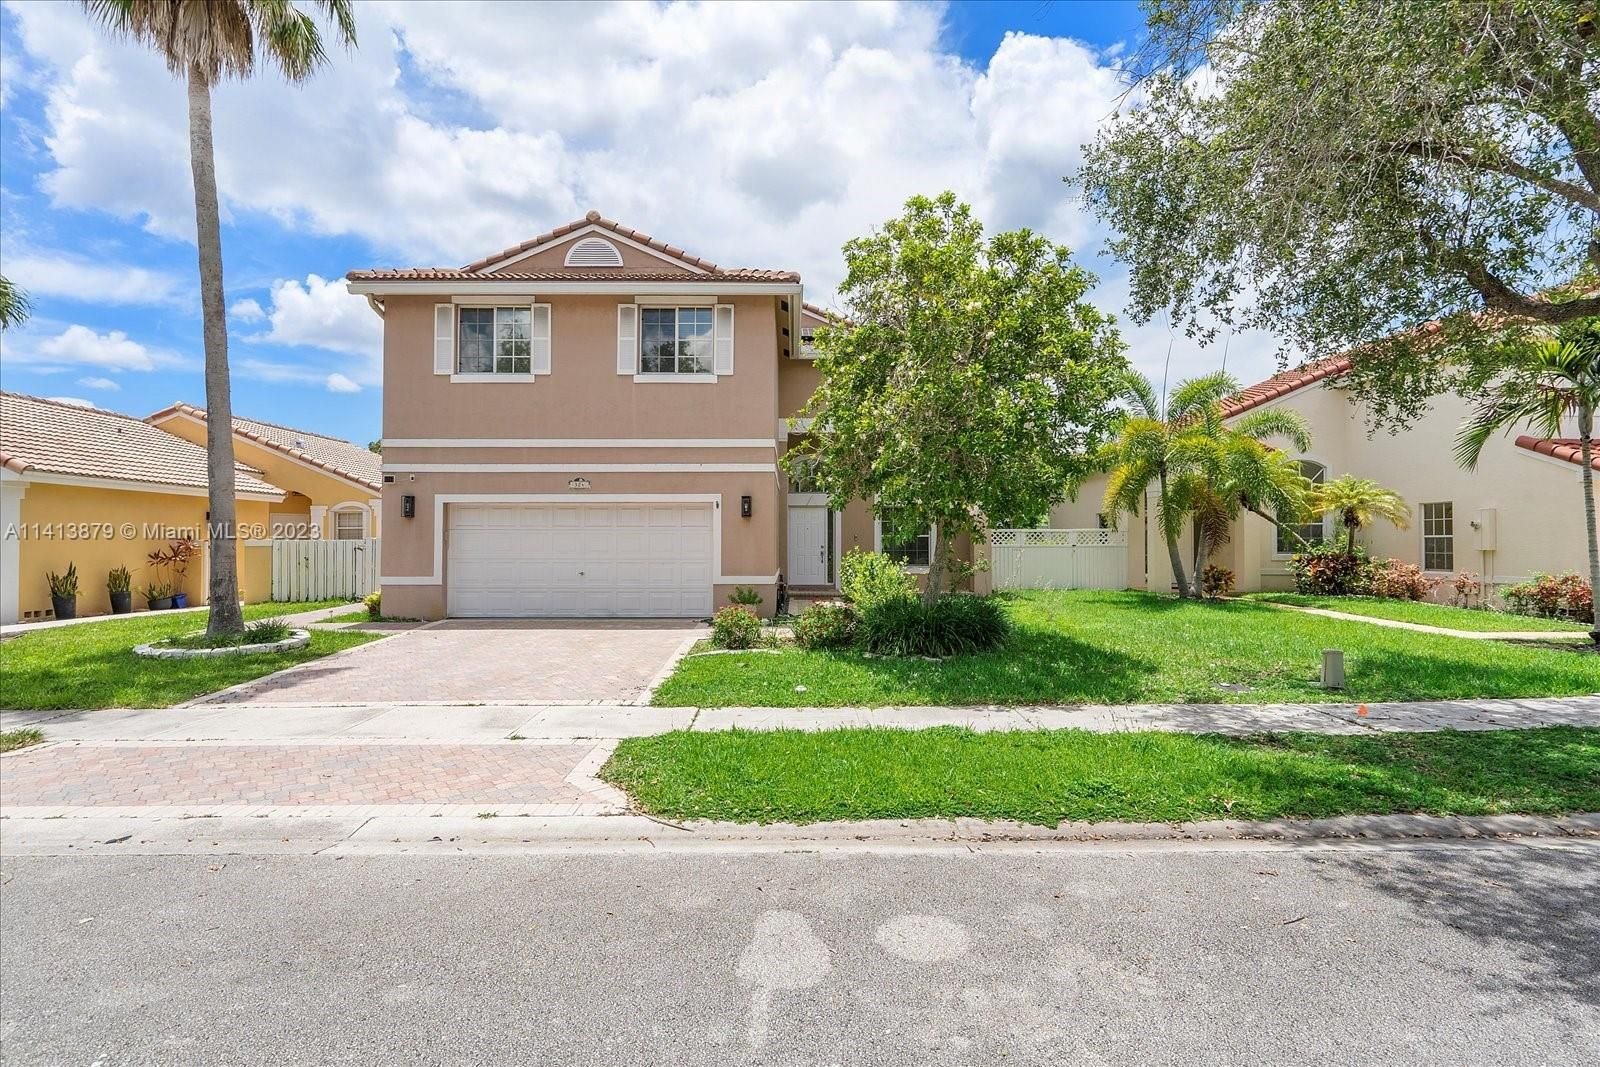 Real estate property located at 324 191st Ave, Broward County, TWIN ACRES, Pembroke Pines, FL